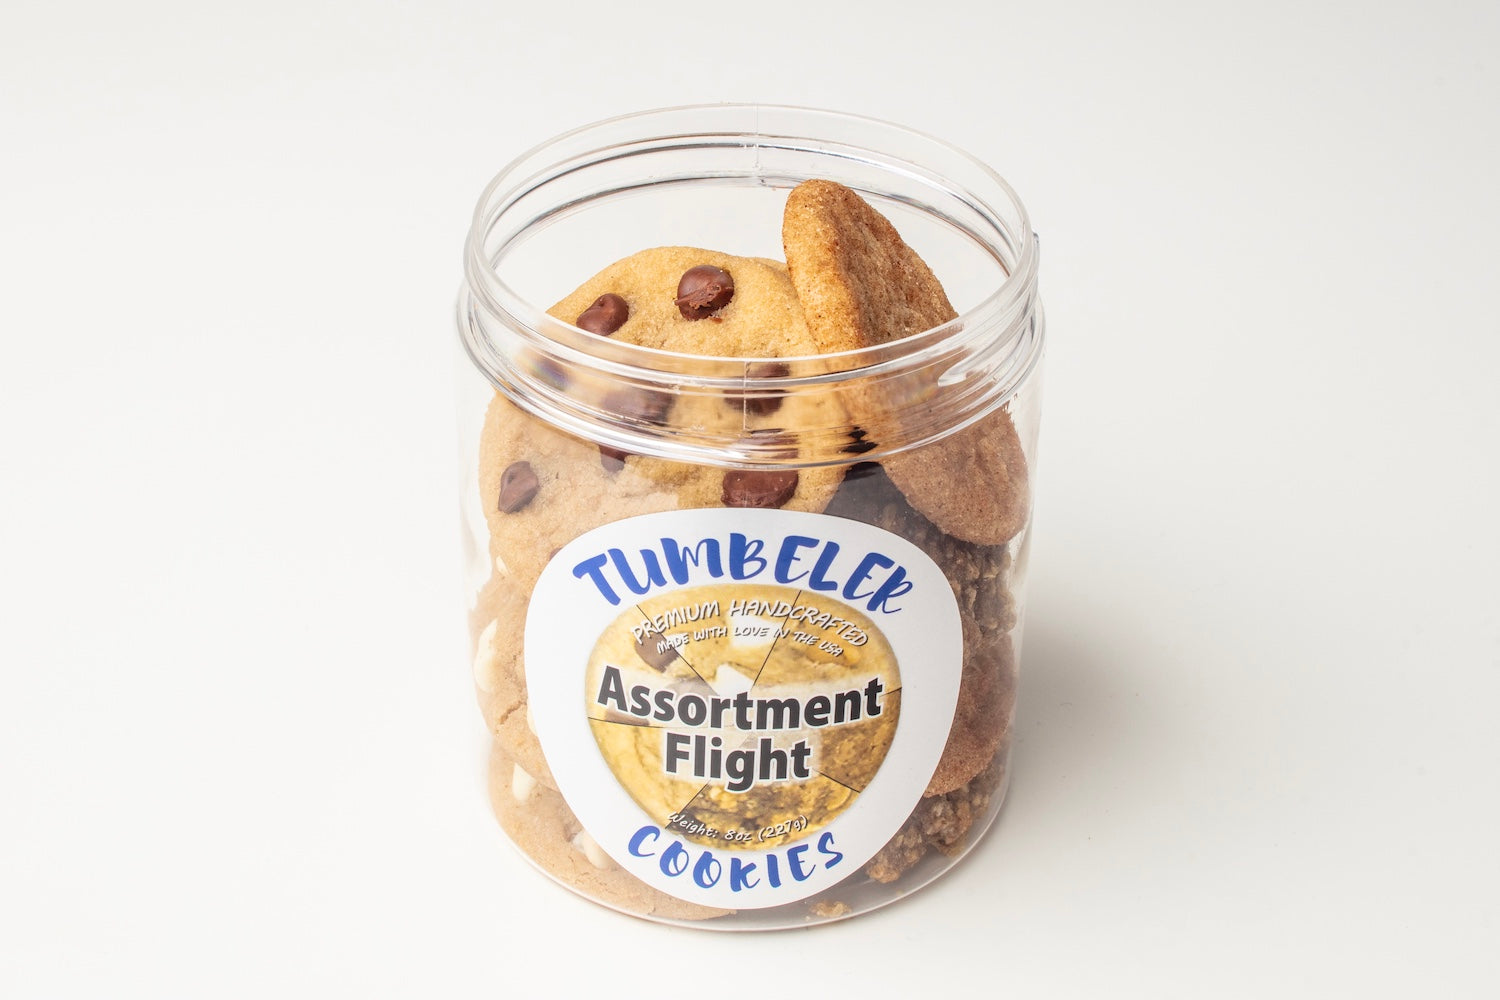 Assortment Flight — 2 Chocolate Chip, 2 Oatmeal Raisin, 2 Reese’s, 2 Snicker doodle, 2 Tumbeler, 2 White Chocolate Chip